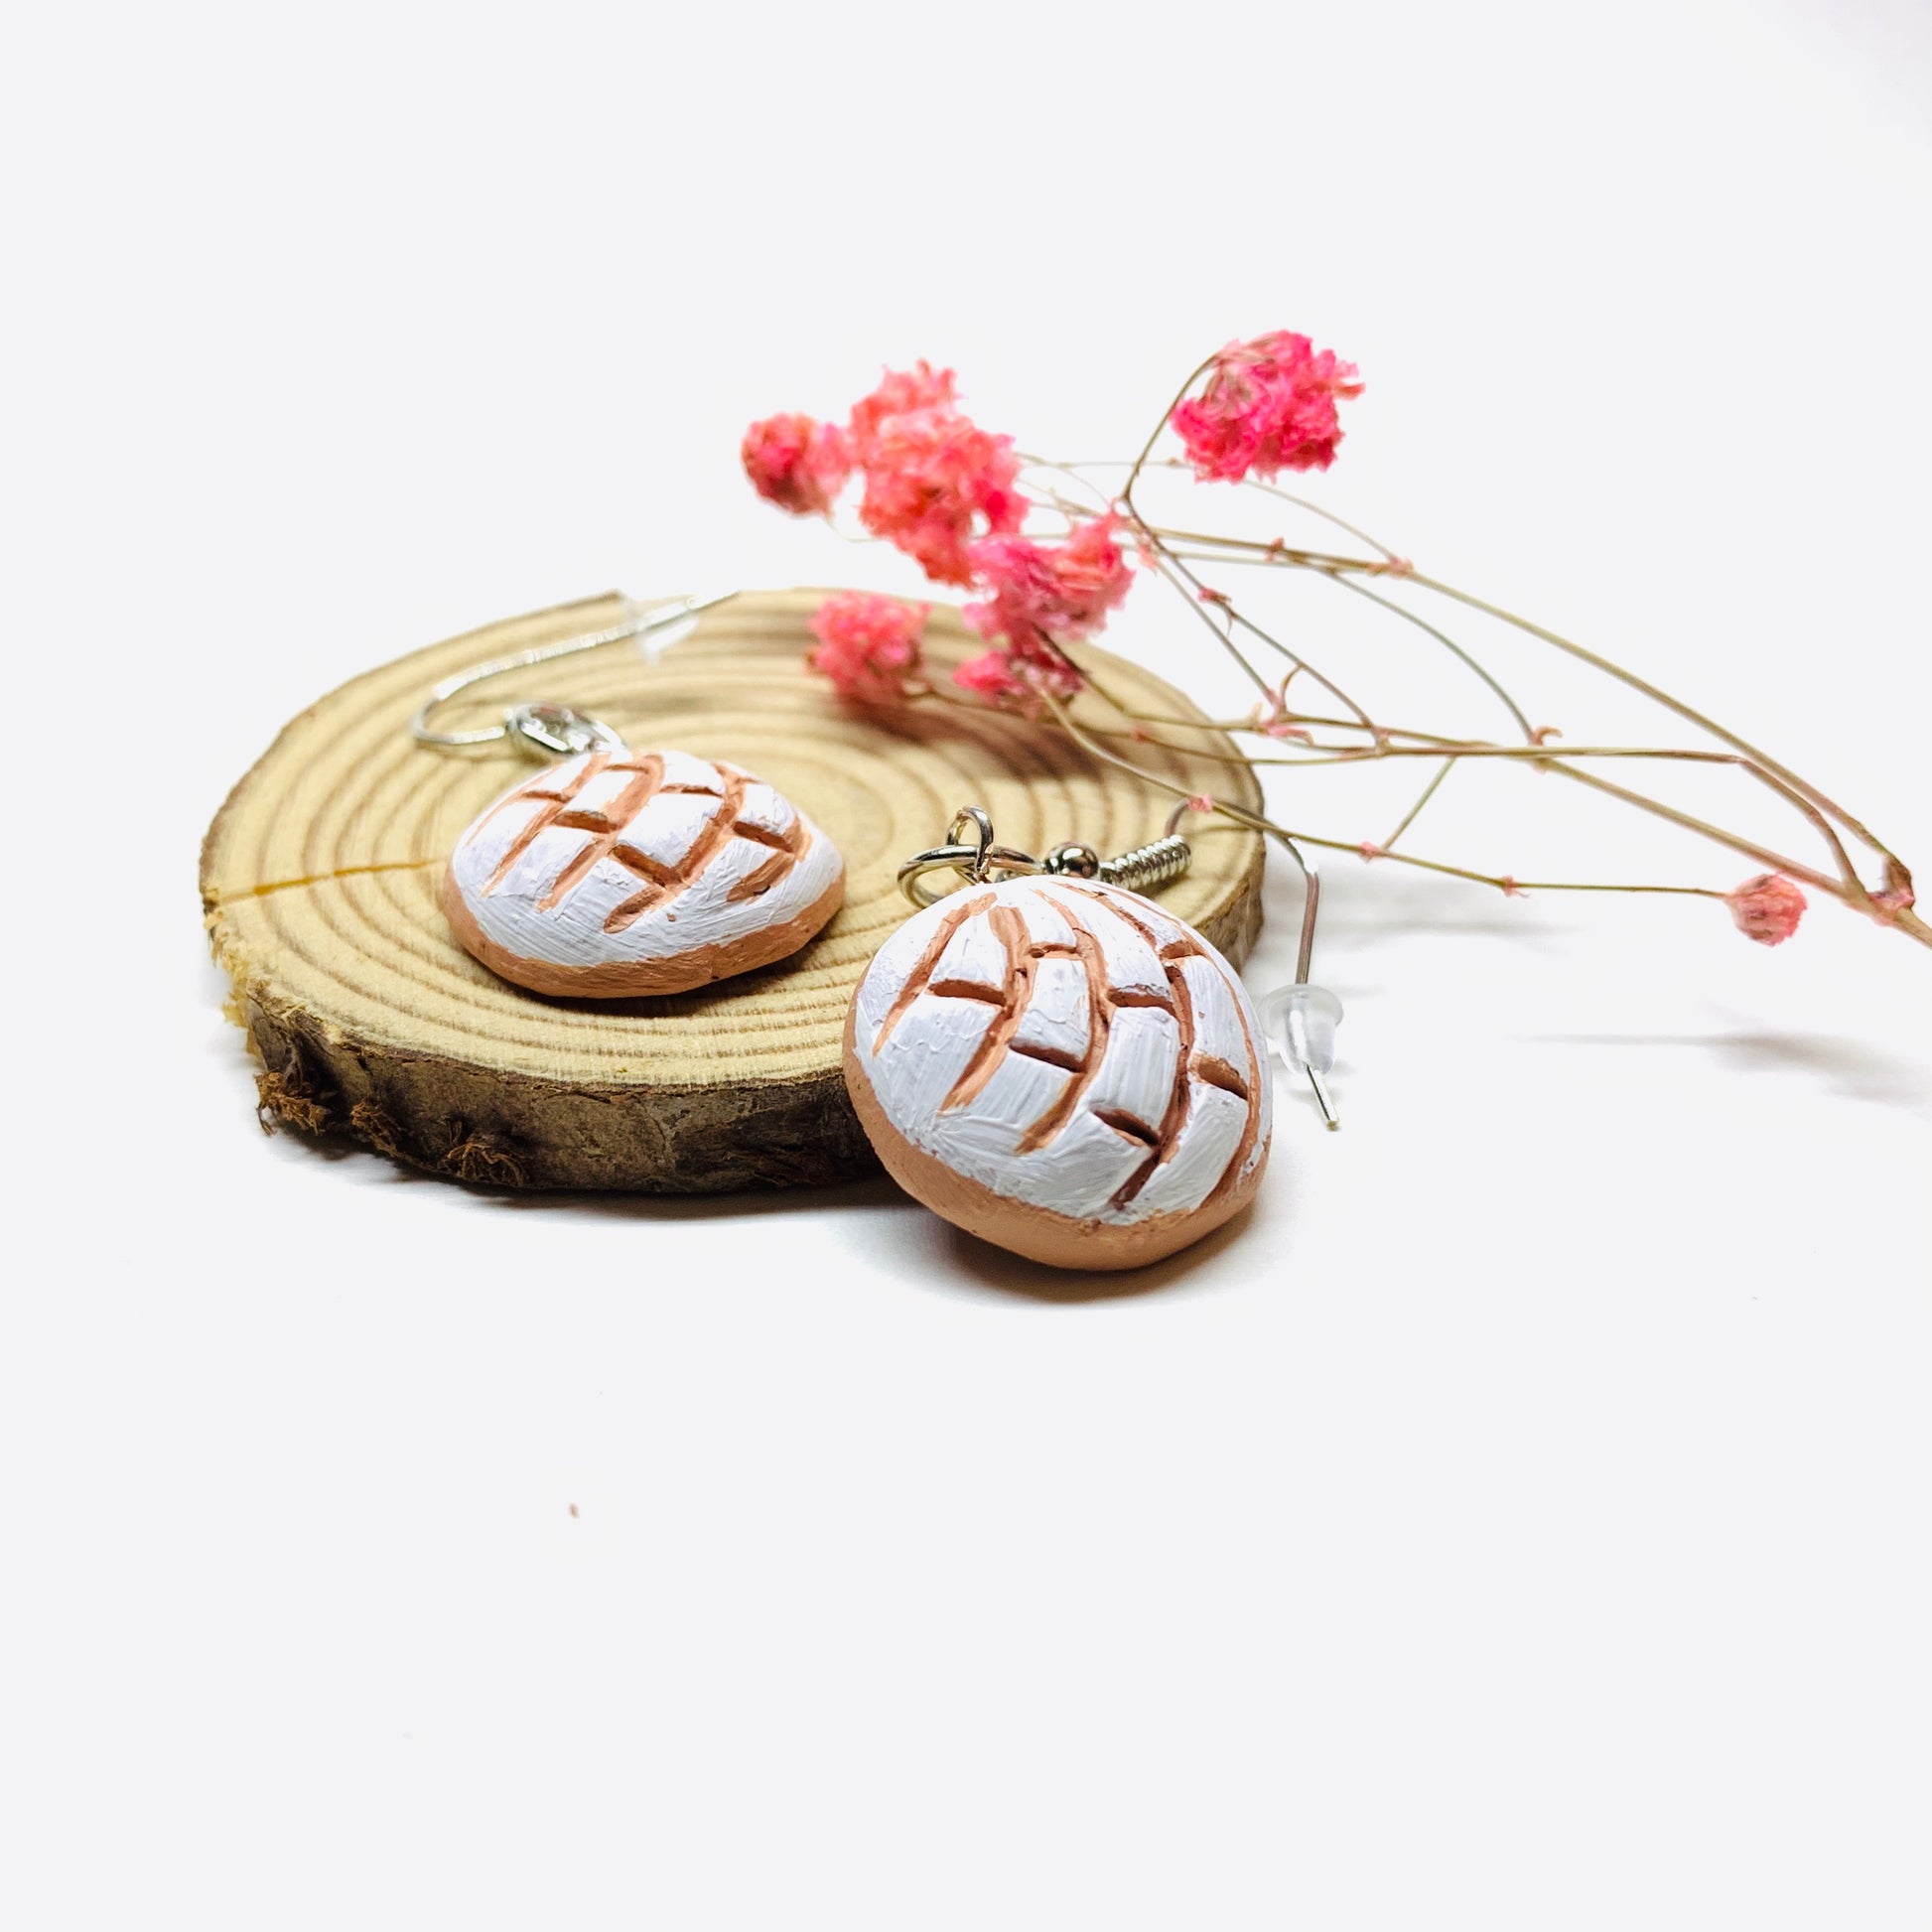 Concha Earrings (Conchitas Clay Earrings): Handmade hand painted natural clay drop and dangle concha earrings (sweet bread) food jewelry. Mexican earrings inspired by Frida Kahlo for fridamaniacs and fridalovers. Lovely girl's birthday sweet sixteen gift idea